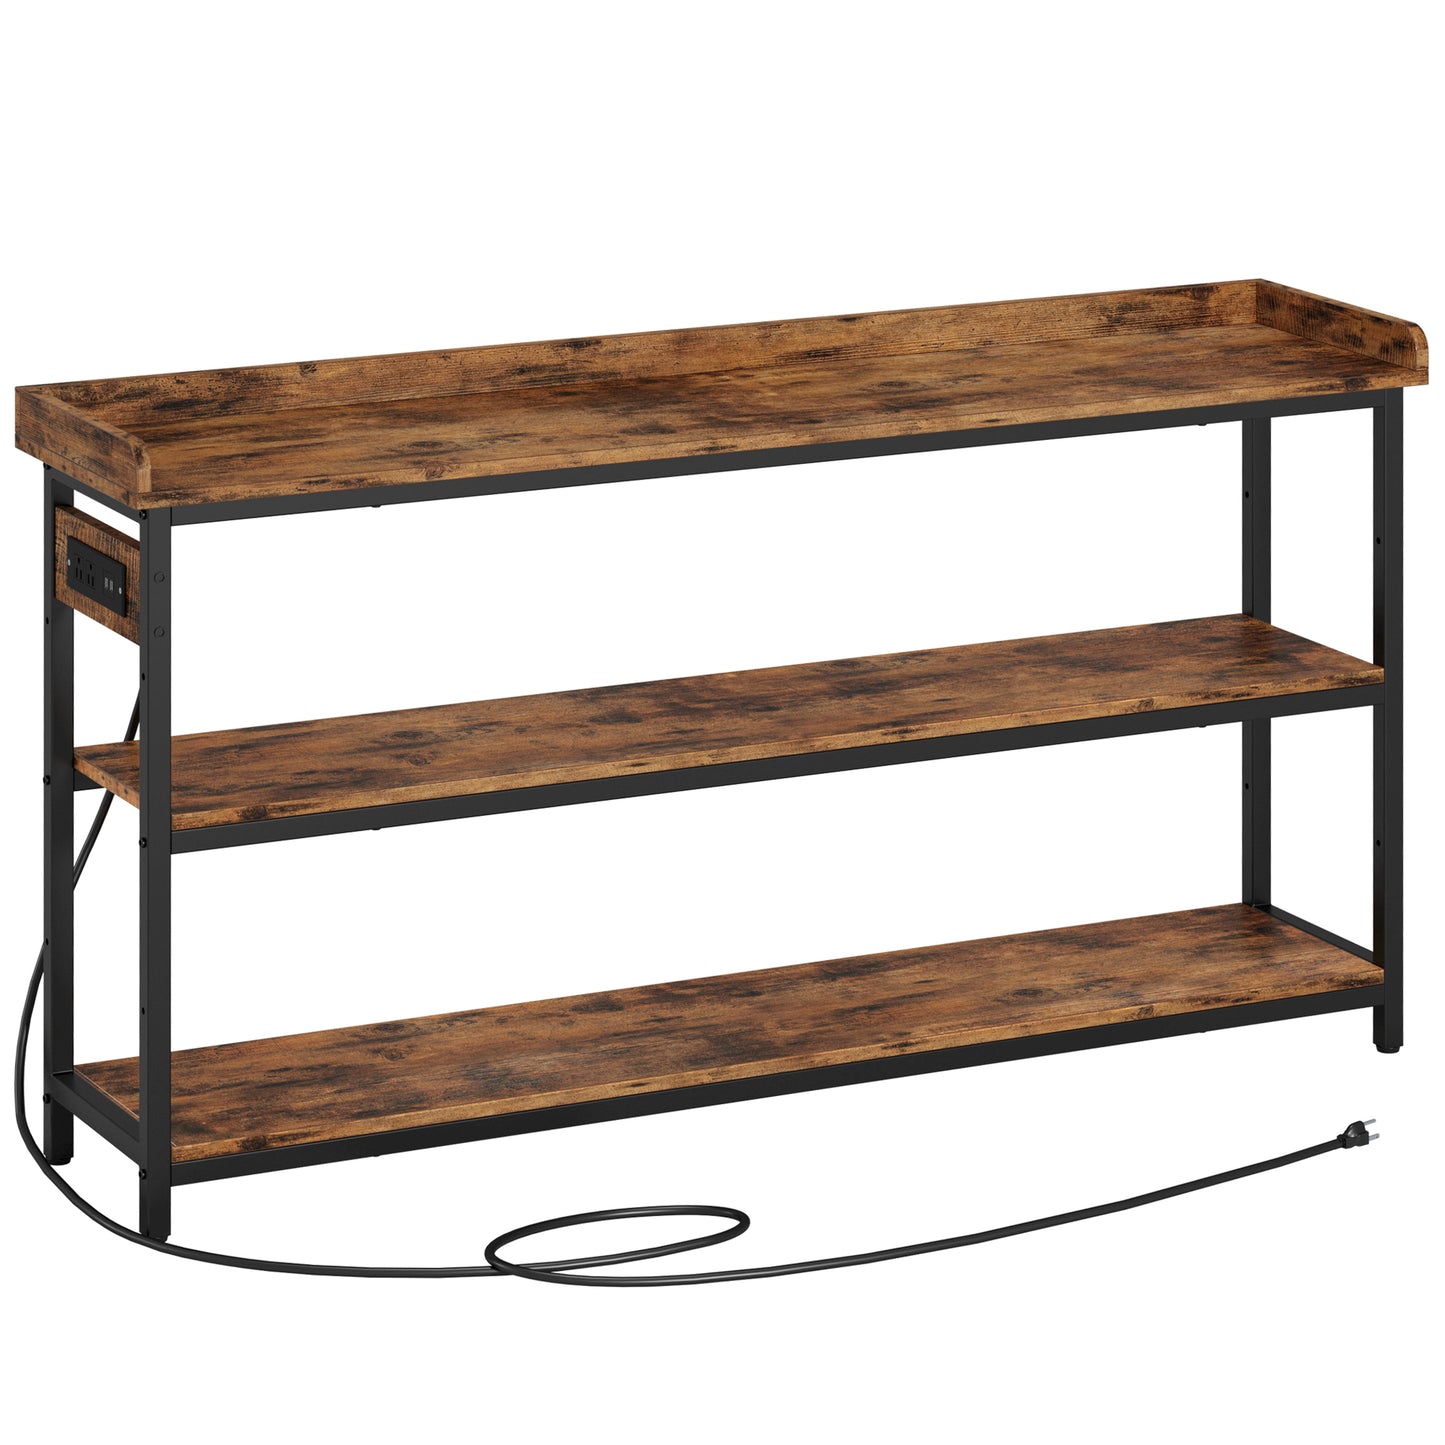 55" Console Table with Power Outlet